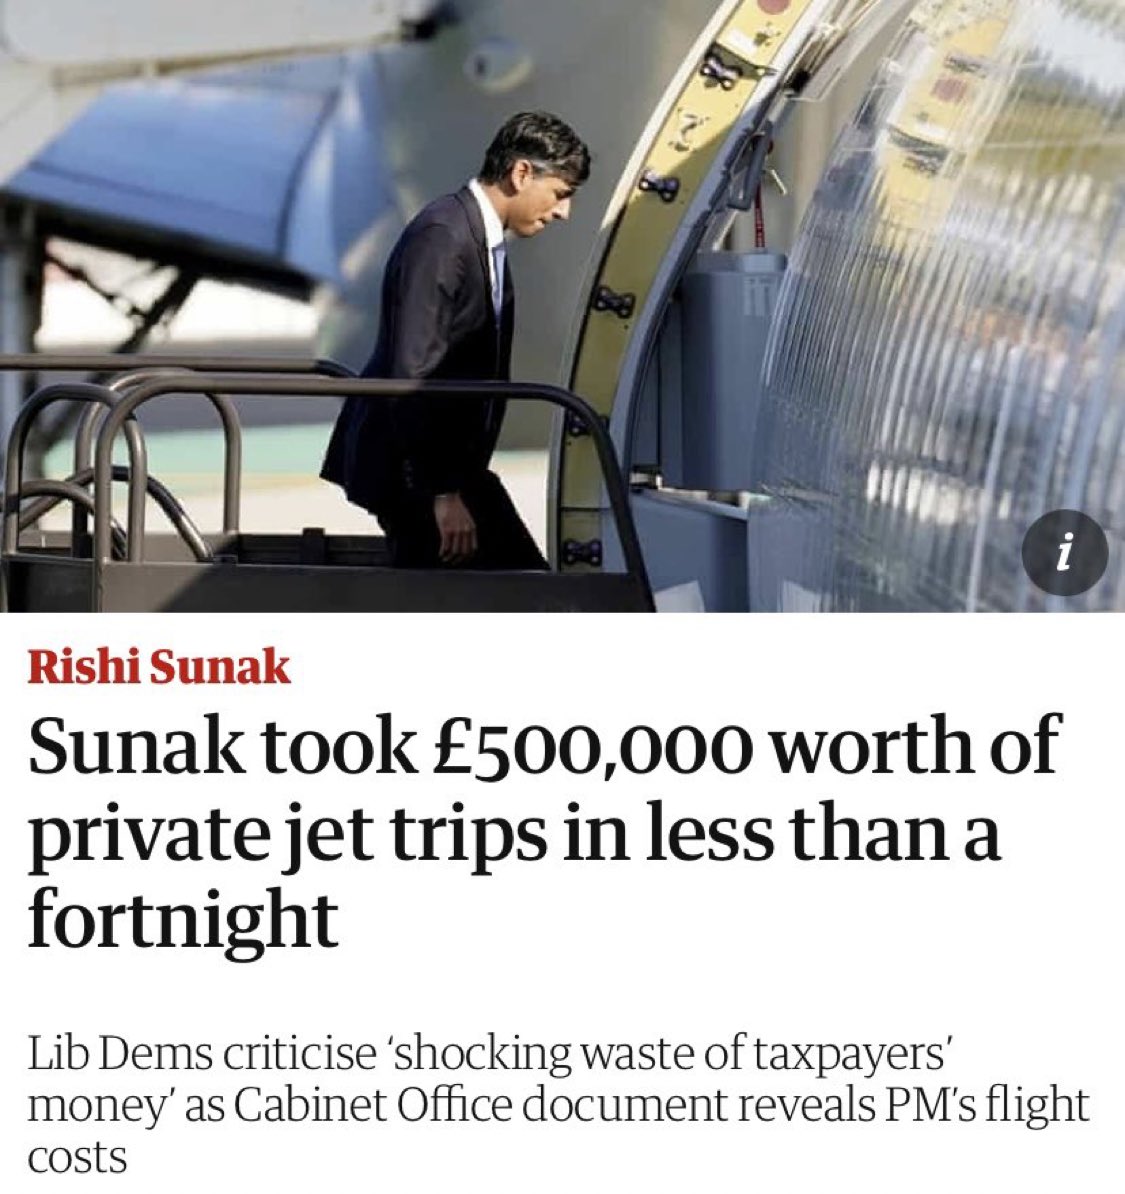 “We must reduce our emissions.” ~ Rishi Sunak In 2022, Rishi Sunak took private jet trips in just over a week that cost almost £500,000 - paid by the taxpayer.